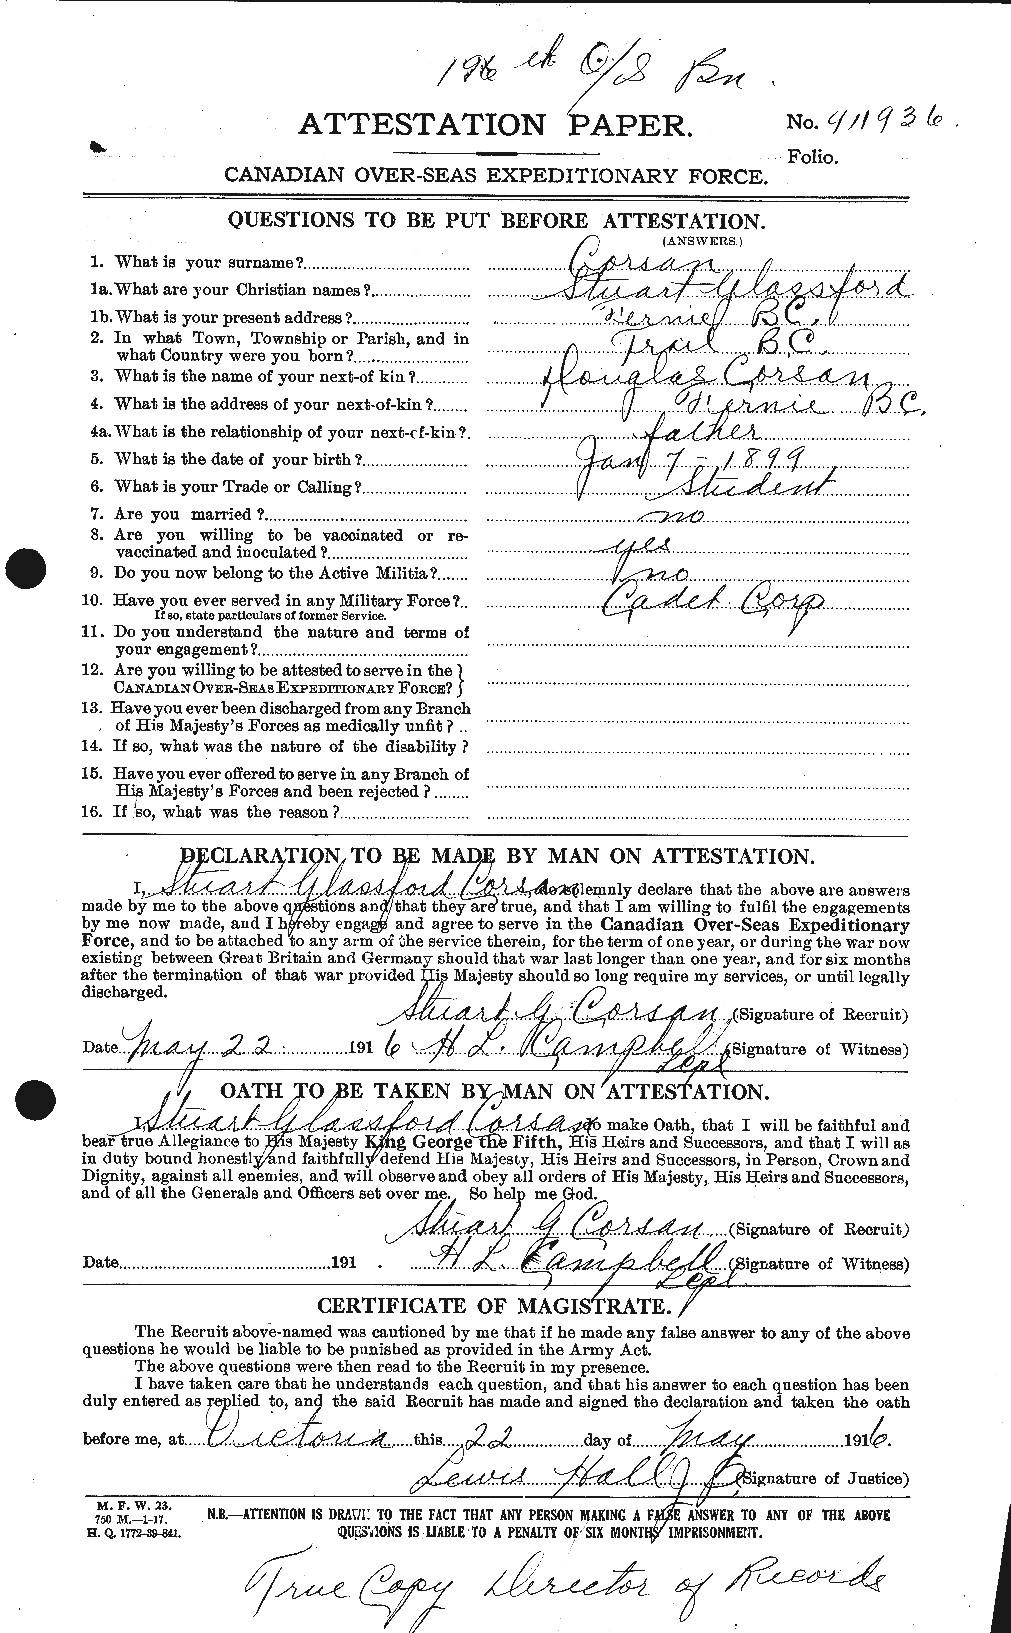 Personnel Records of the First World War - CEF 054203a